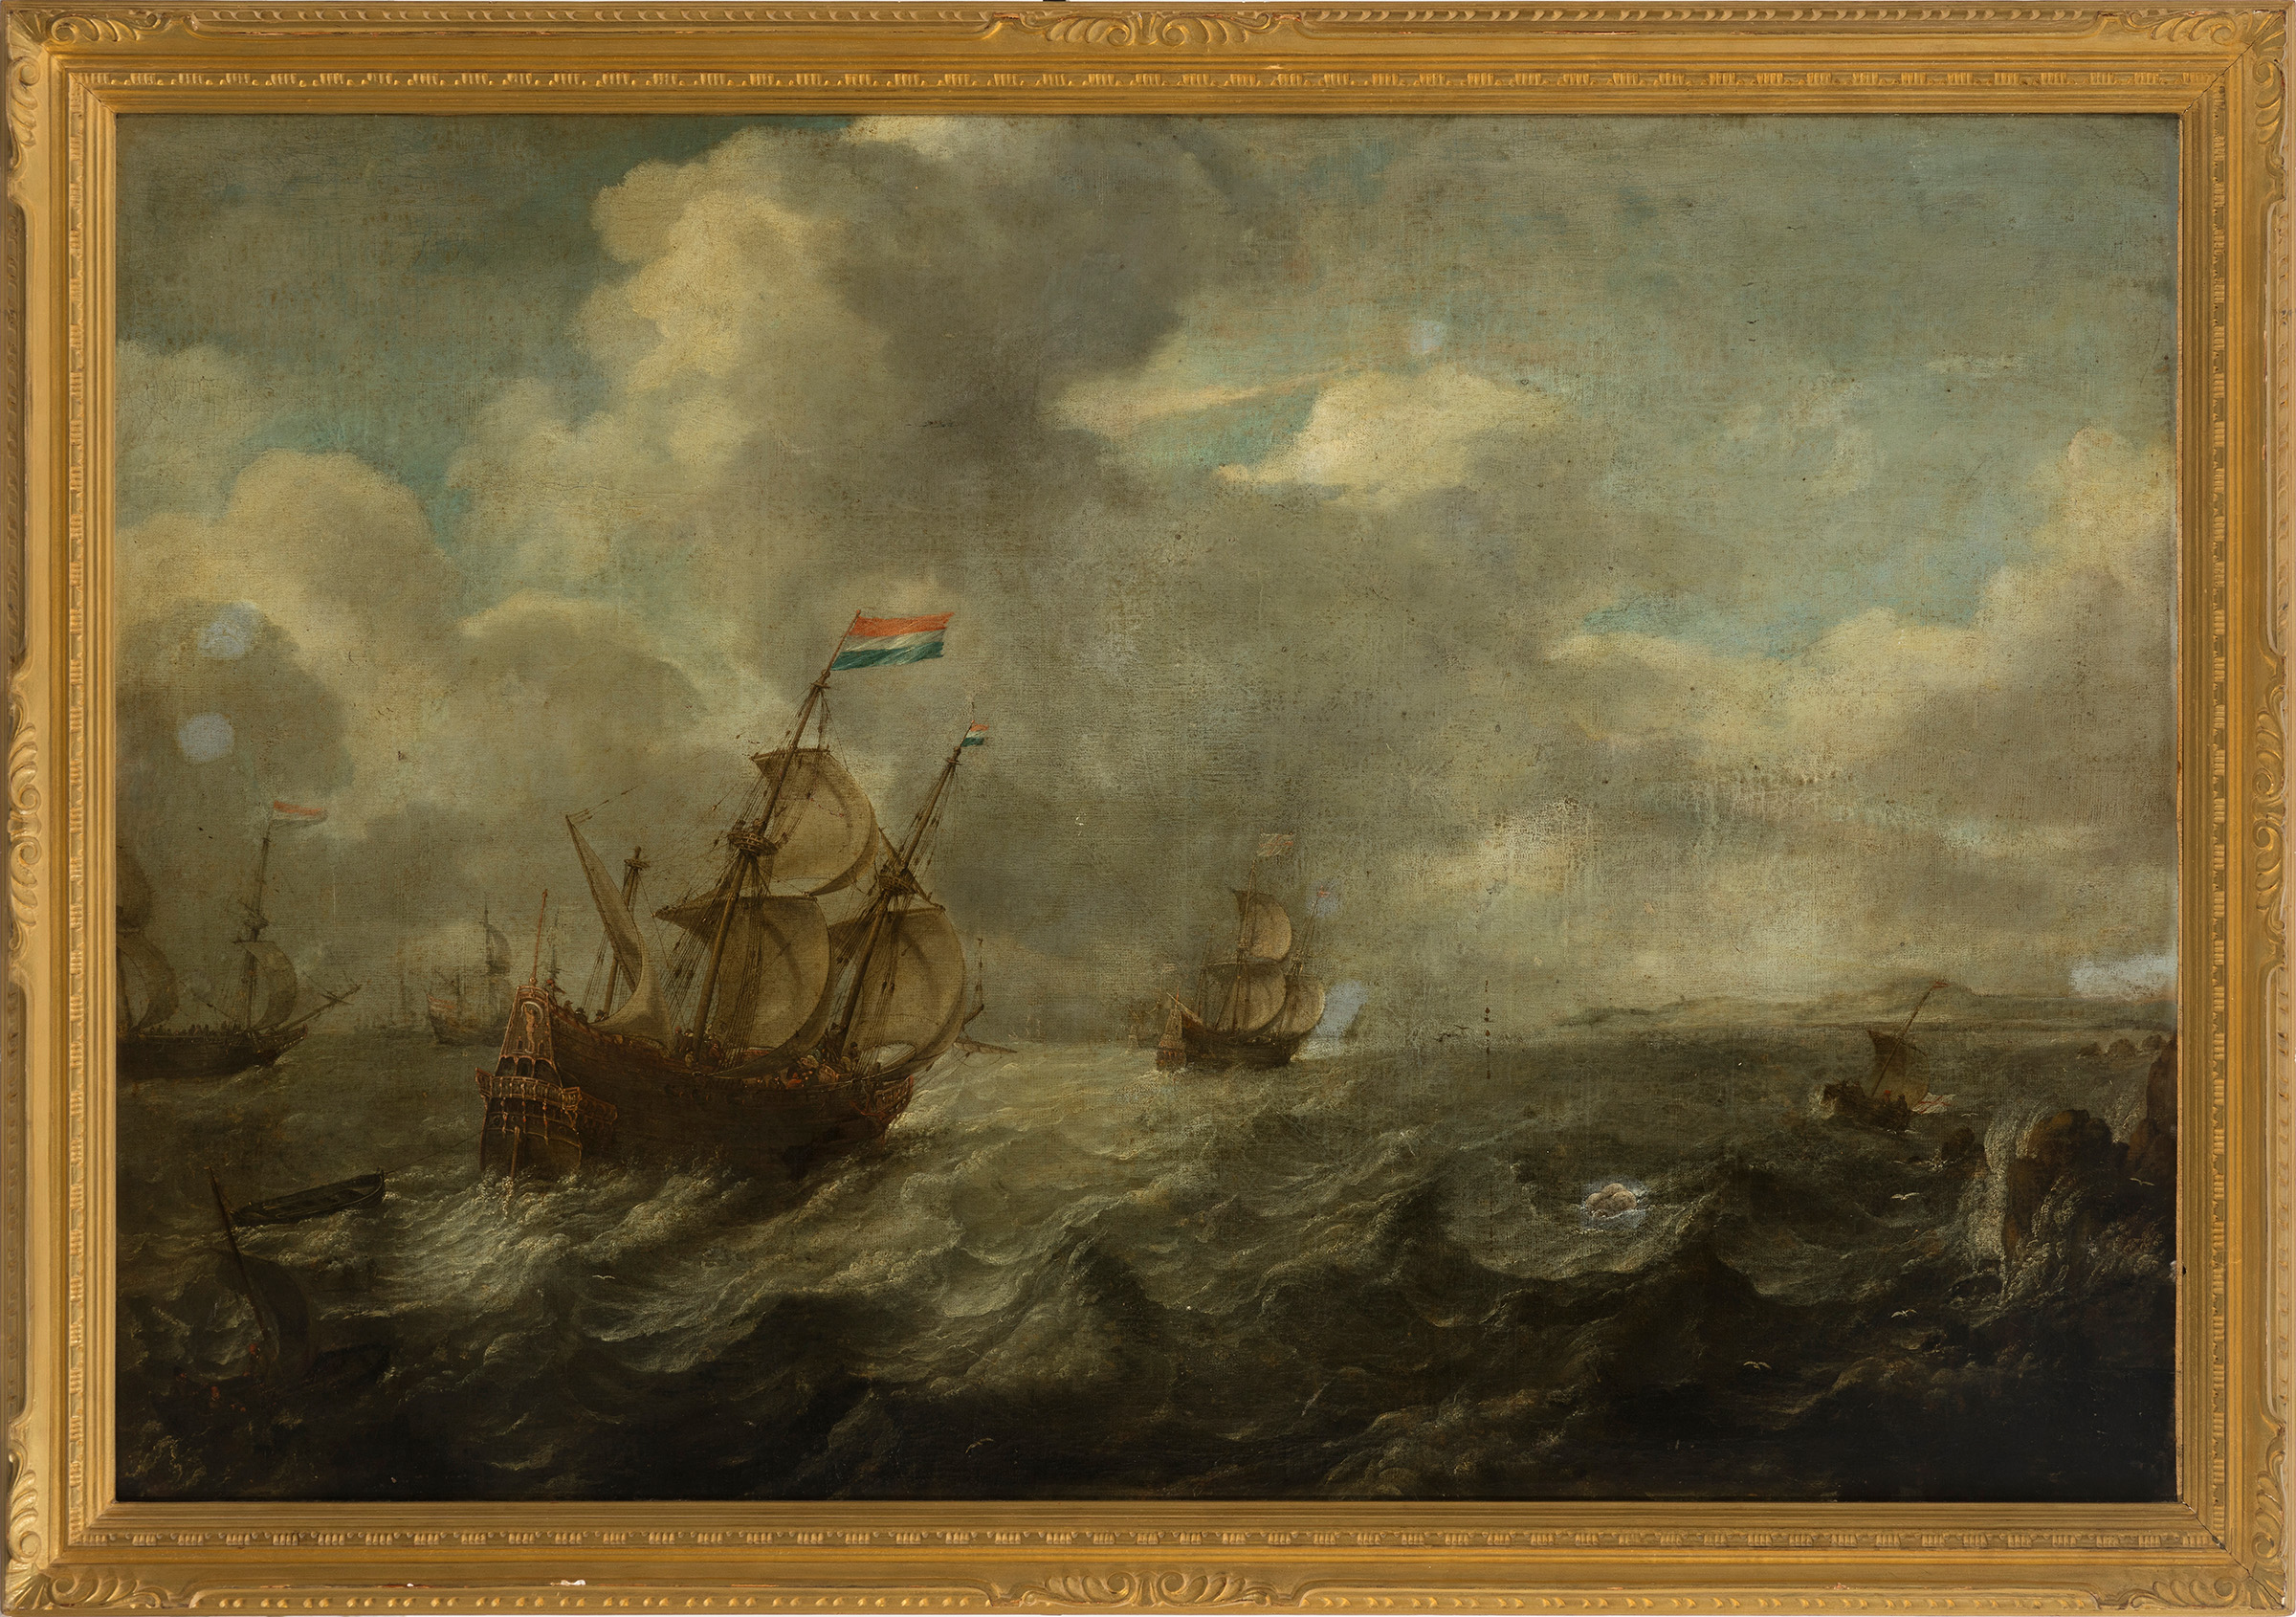 17th century Dutch school."Marina".Oil on canvas.Presents tasting of cleaning.It shows label on - Image 6 of 7